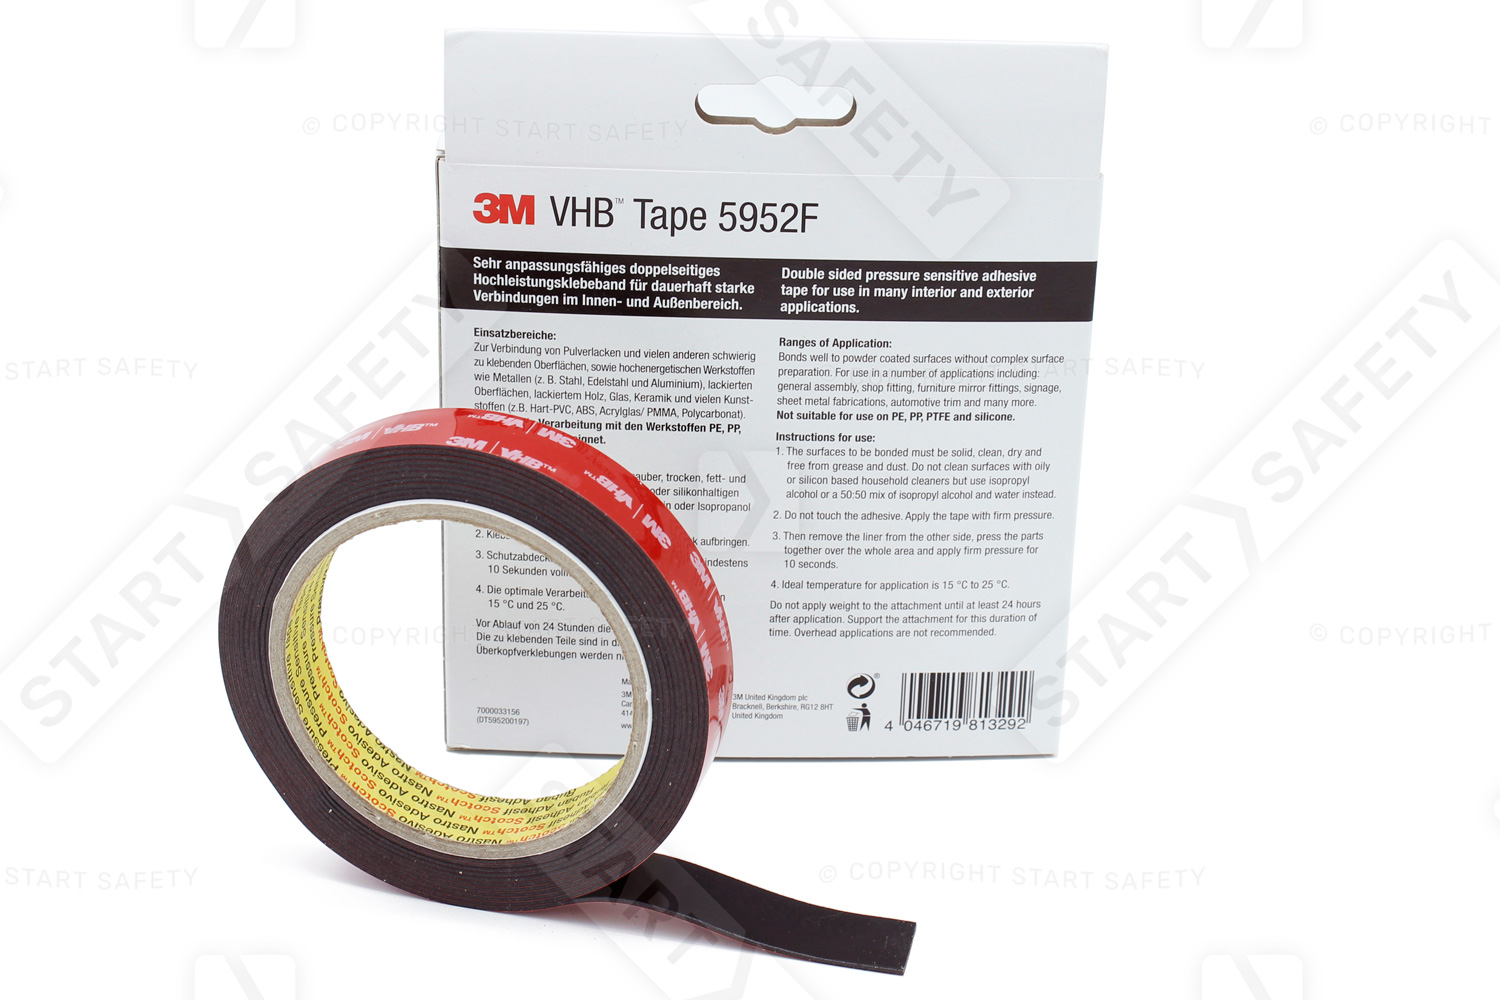 VHB 5952F packaging with instructions